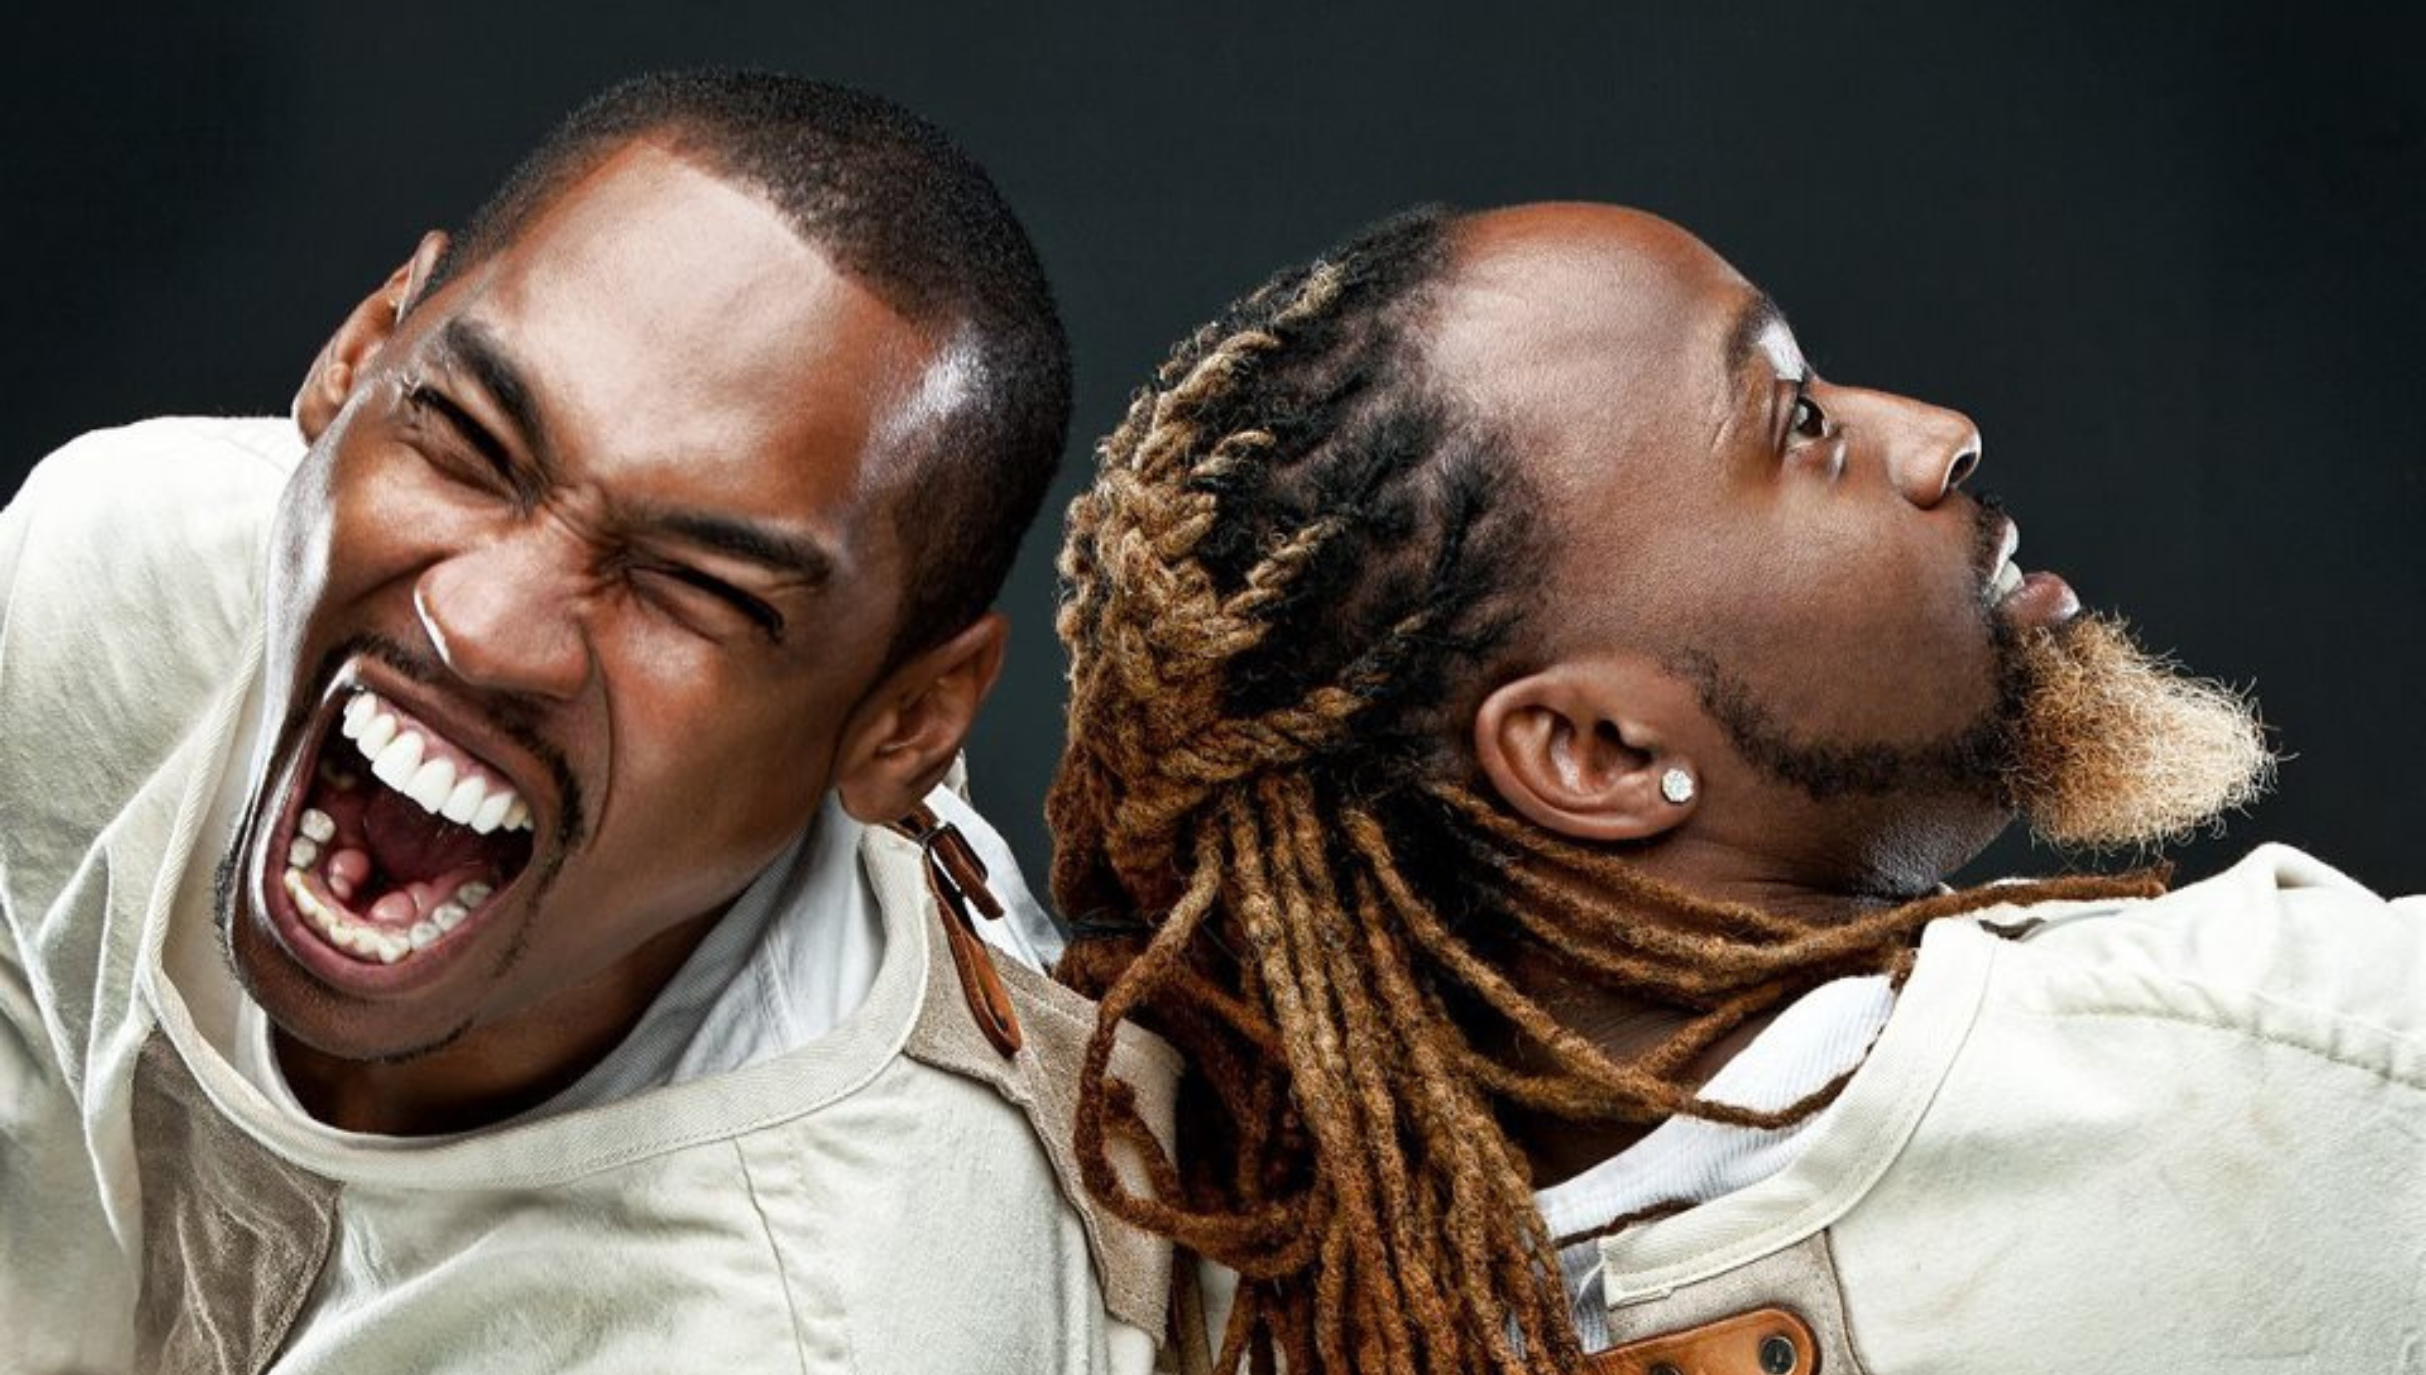 Ying Yang Twins Live in Concert